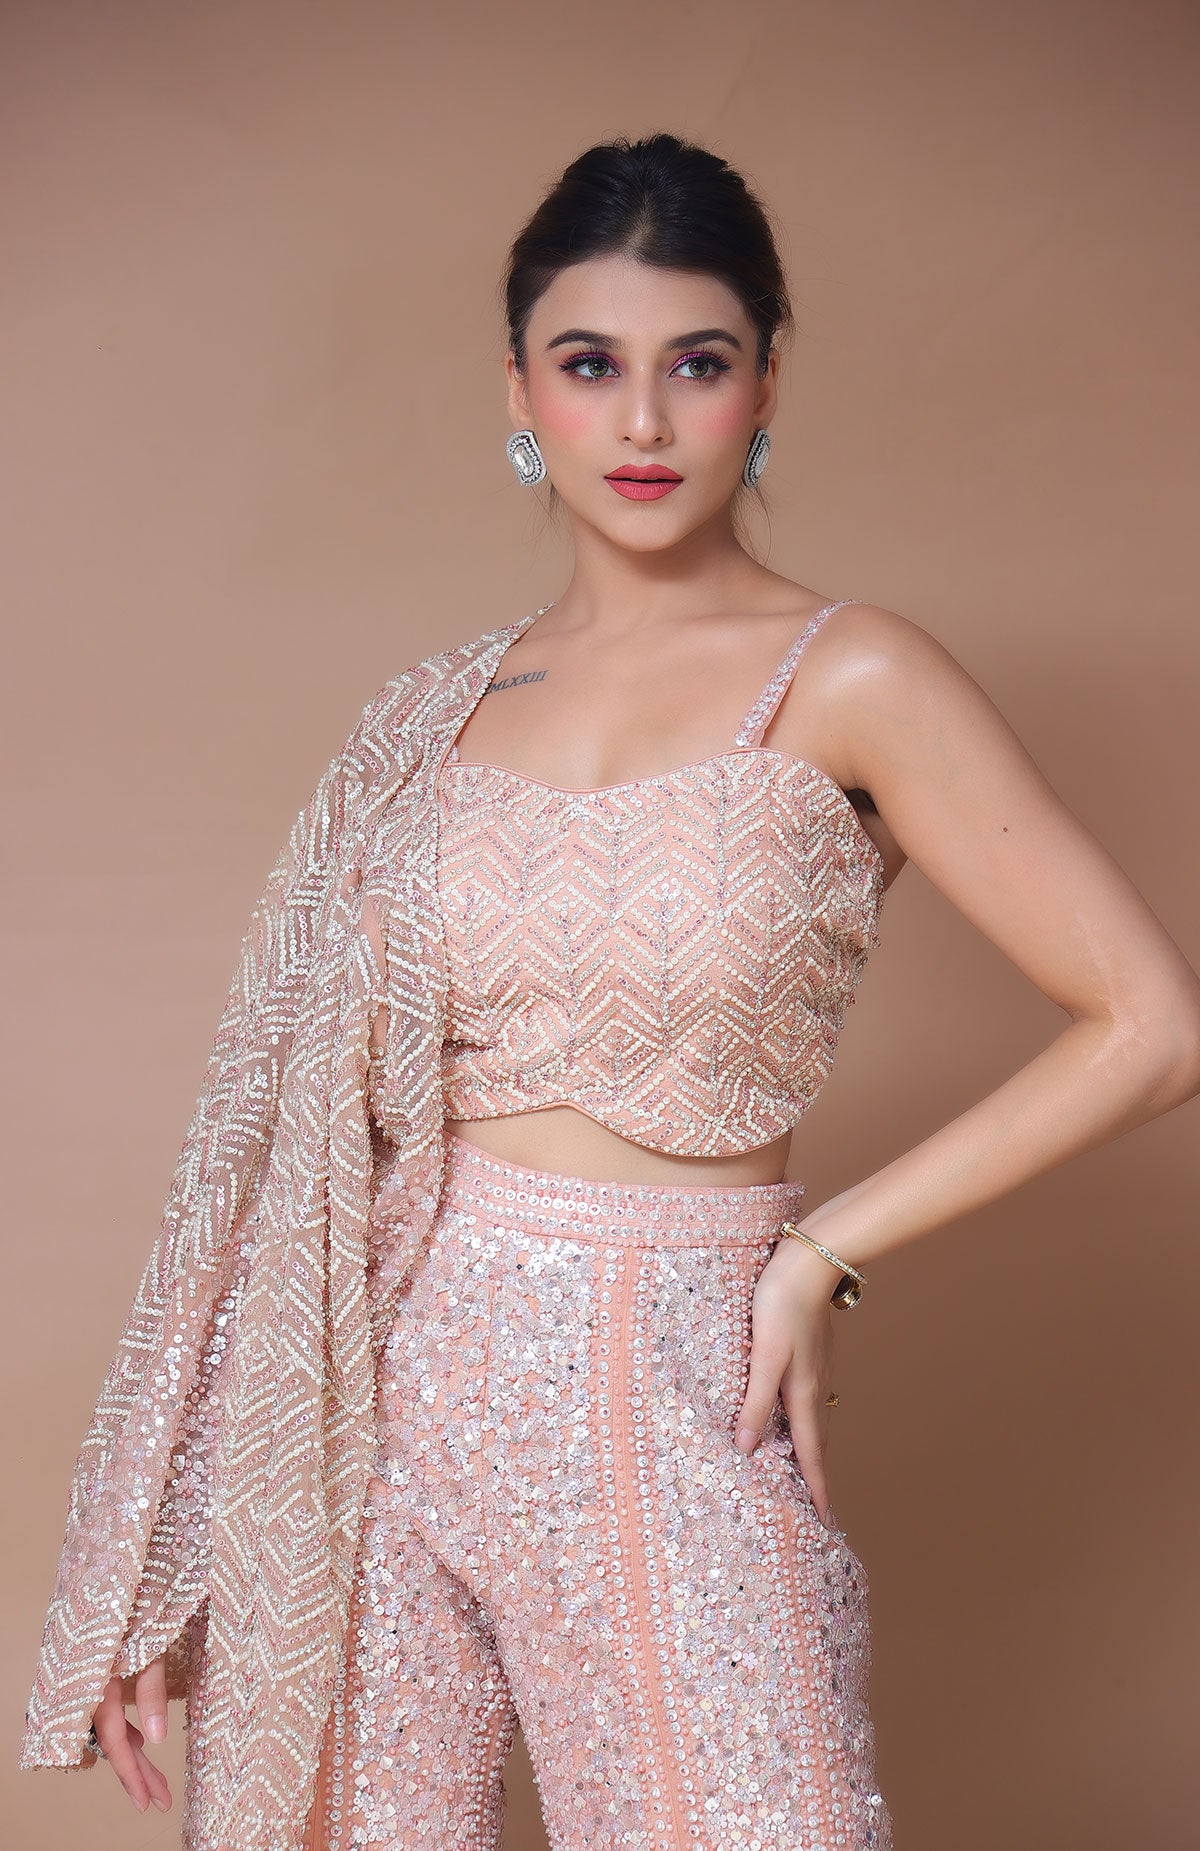 Peach Sharara Suit along with jacket and dupatta in net having heavy embroidery